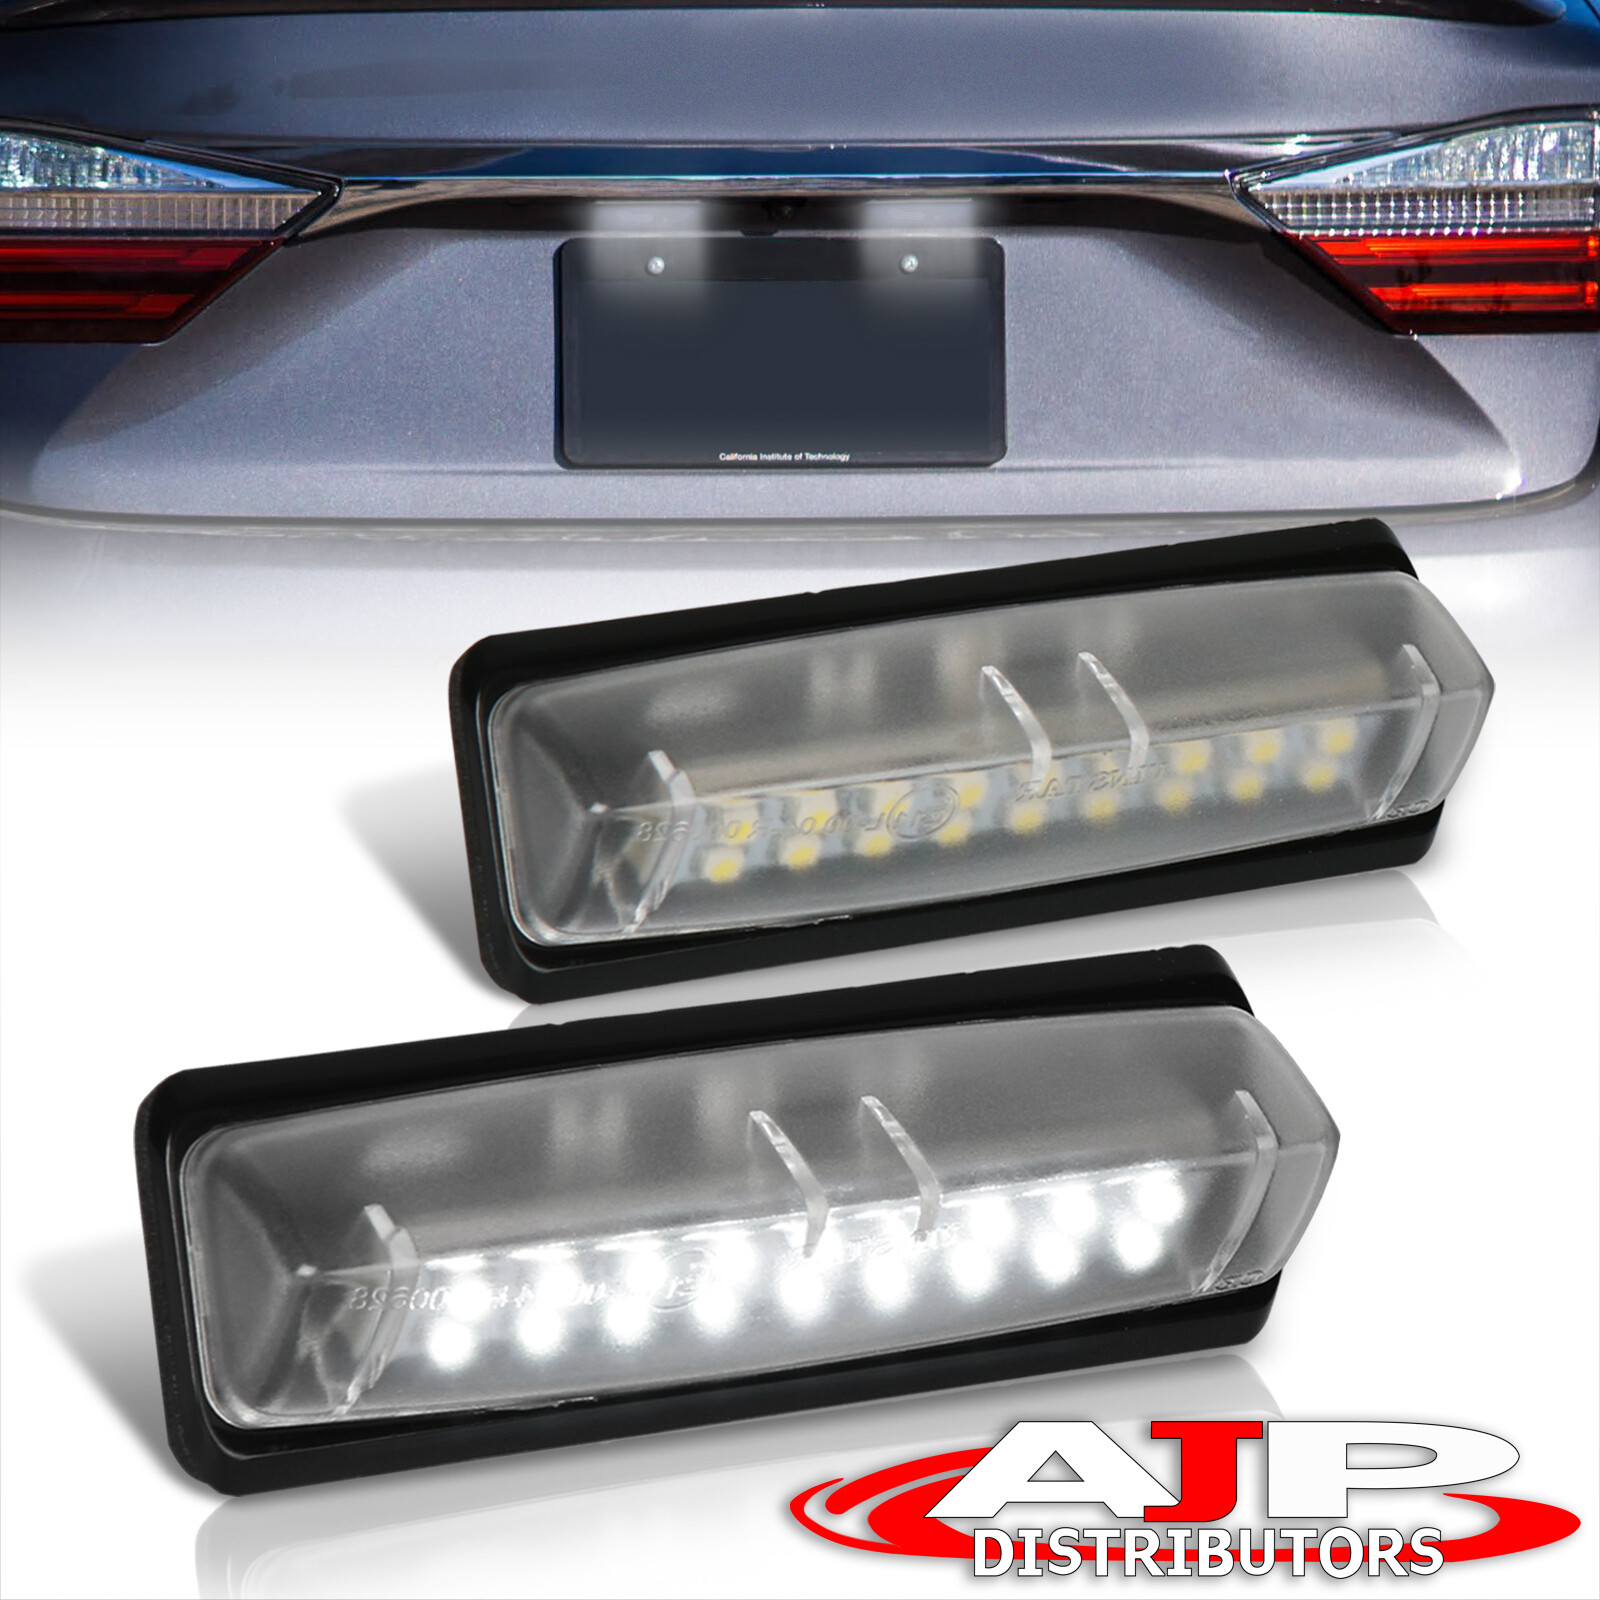 2Pcs Bright 18SMD LED License Plate Lights Lamps For Toyota Camry Prius Echo tC eBay